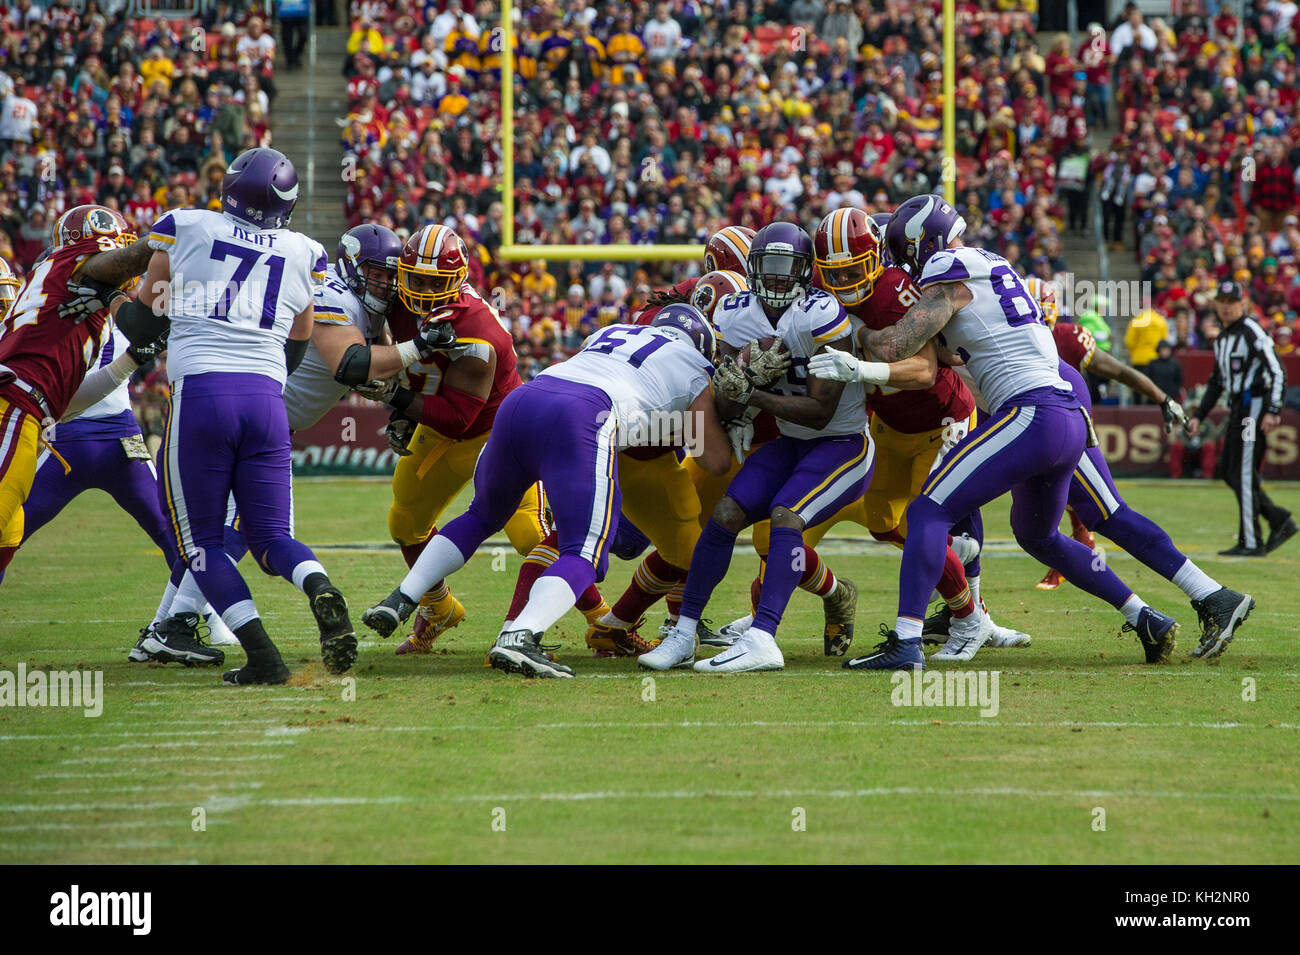 Landover, MD, USA. 12th Nov, 2017. Minnesota Vikings running back Latavius Murray (25) meets the Redskins defensive line and gets pushed backwards during the matchup between the Minnesota Vikings and the Washington Redskins at FedEx Field in Landover, MD. Credit: csm/Alamy Live News Stock Photo